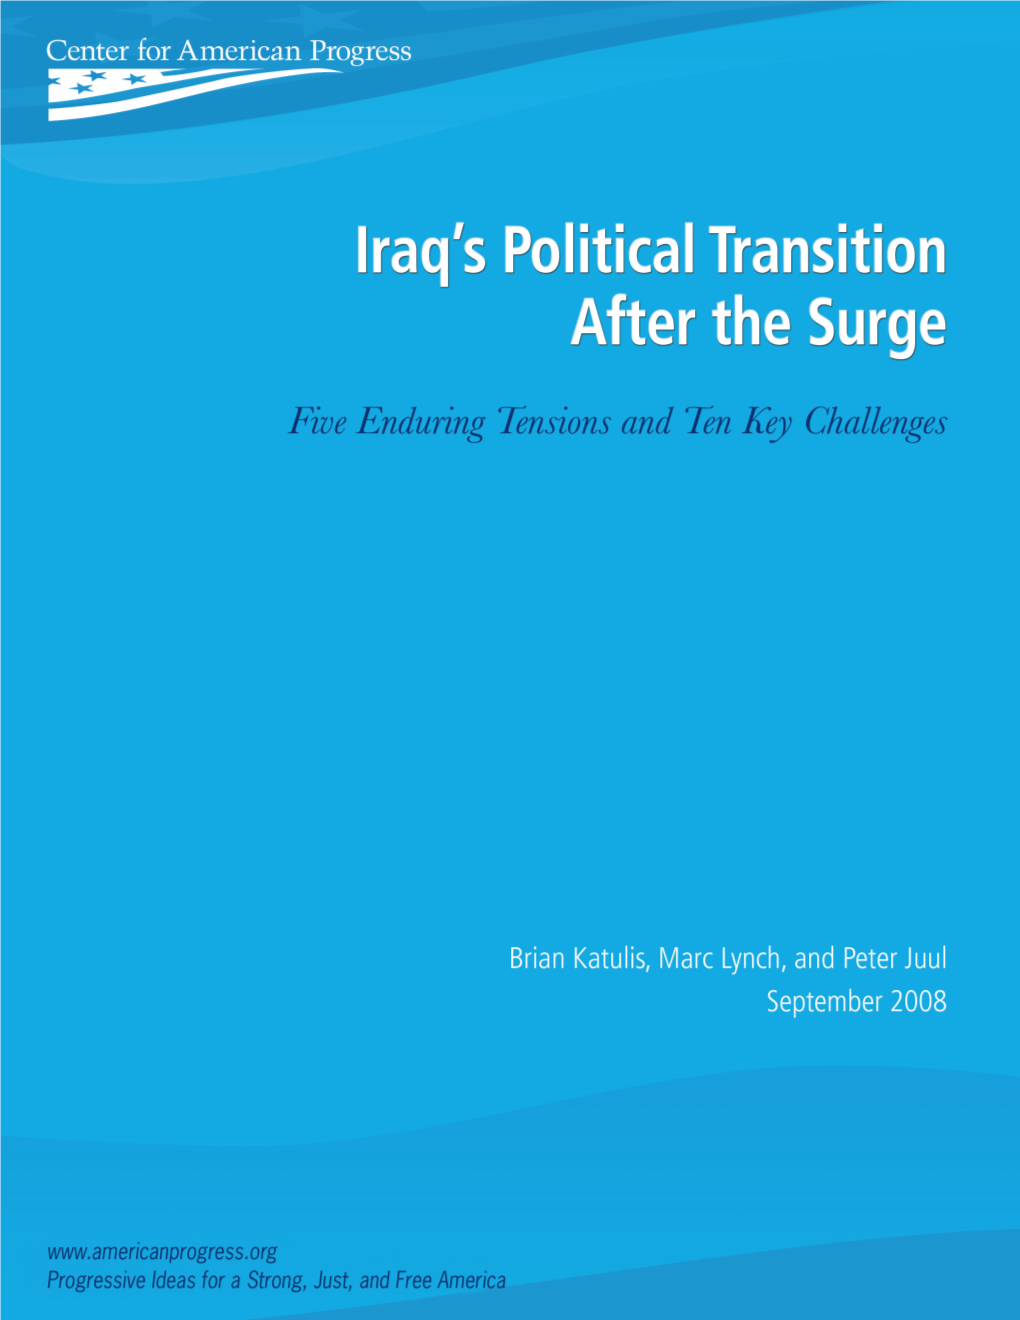 Iraq's Political Transition After the Surge